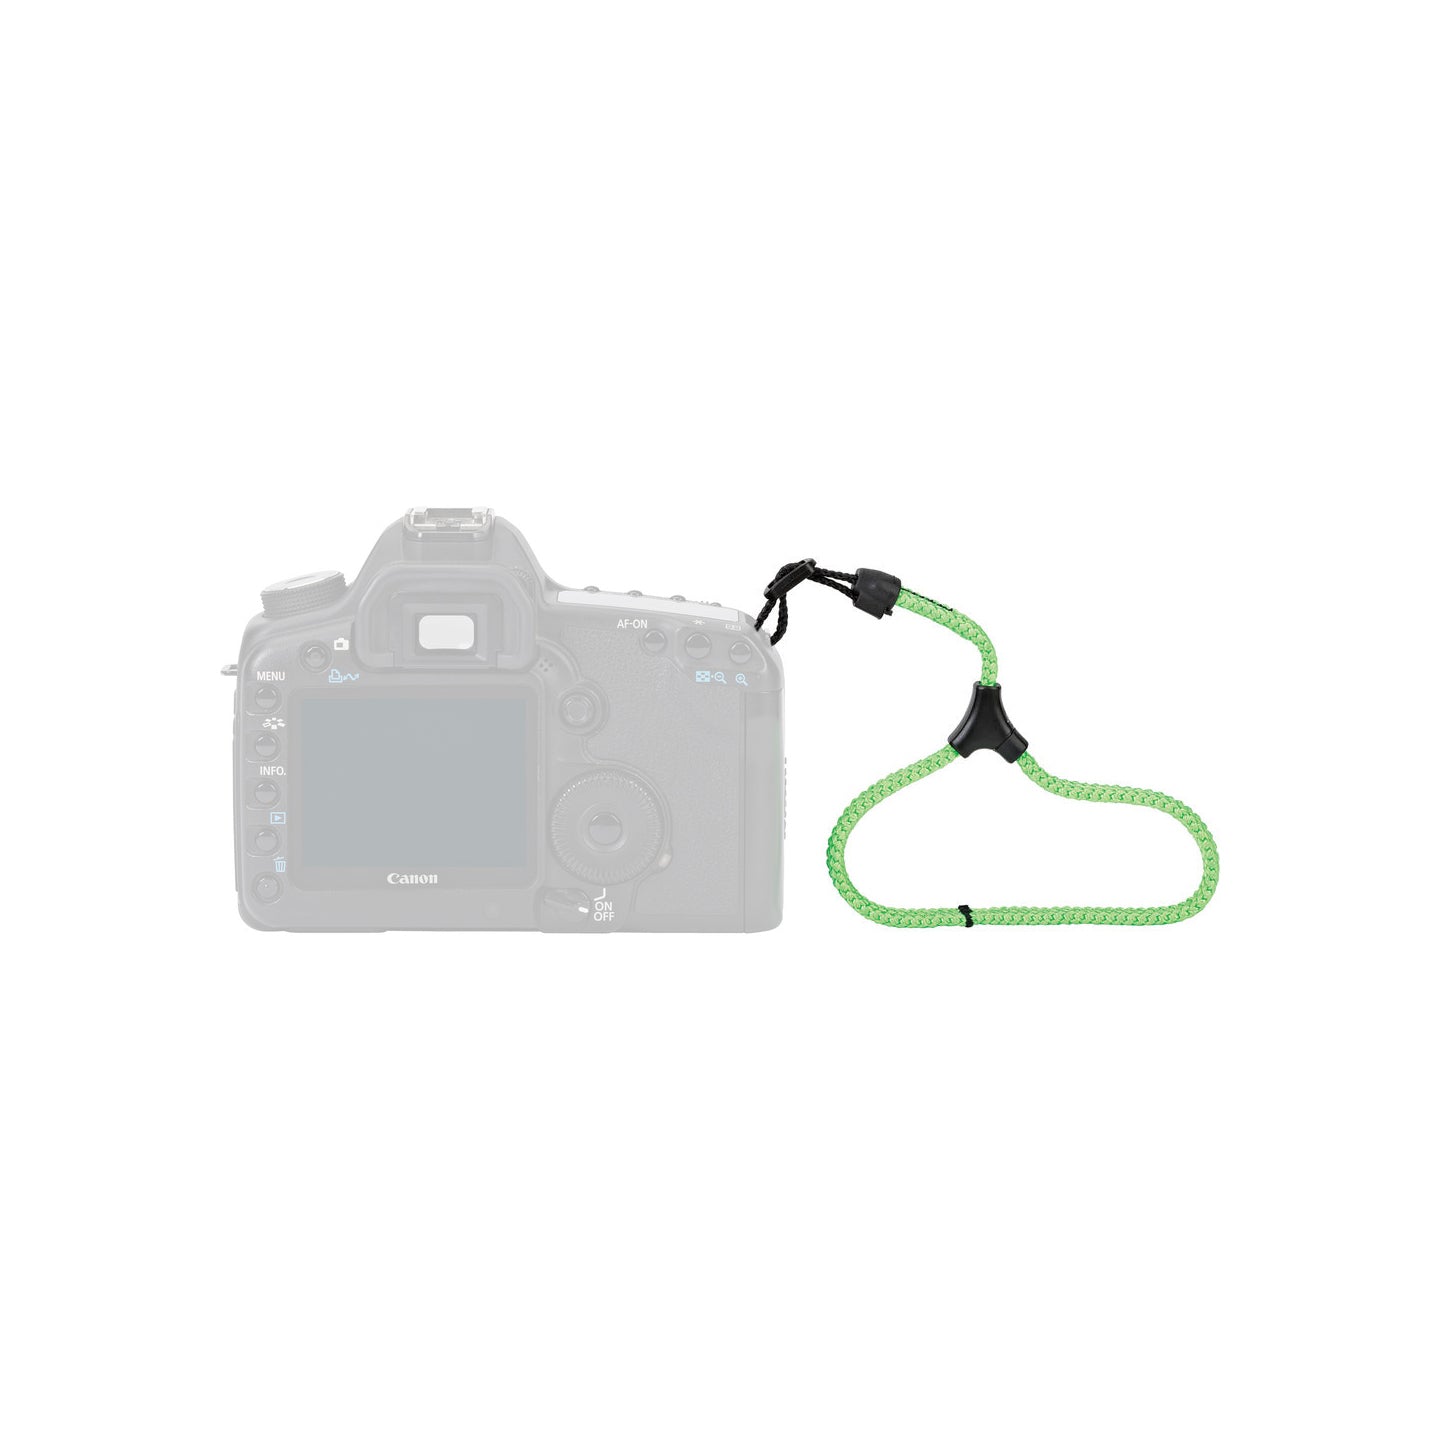 JOBY Camera Wrist Strap Braided Nylon Cord with Adjustable Lock Stopper for DSLR / Mirrorless (Charcoal, Green) | 1271, 1274